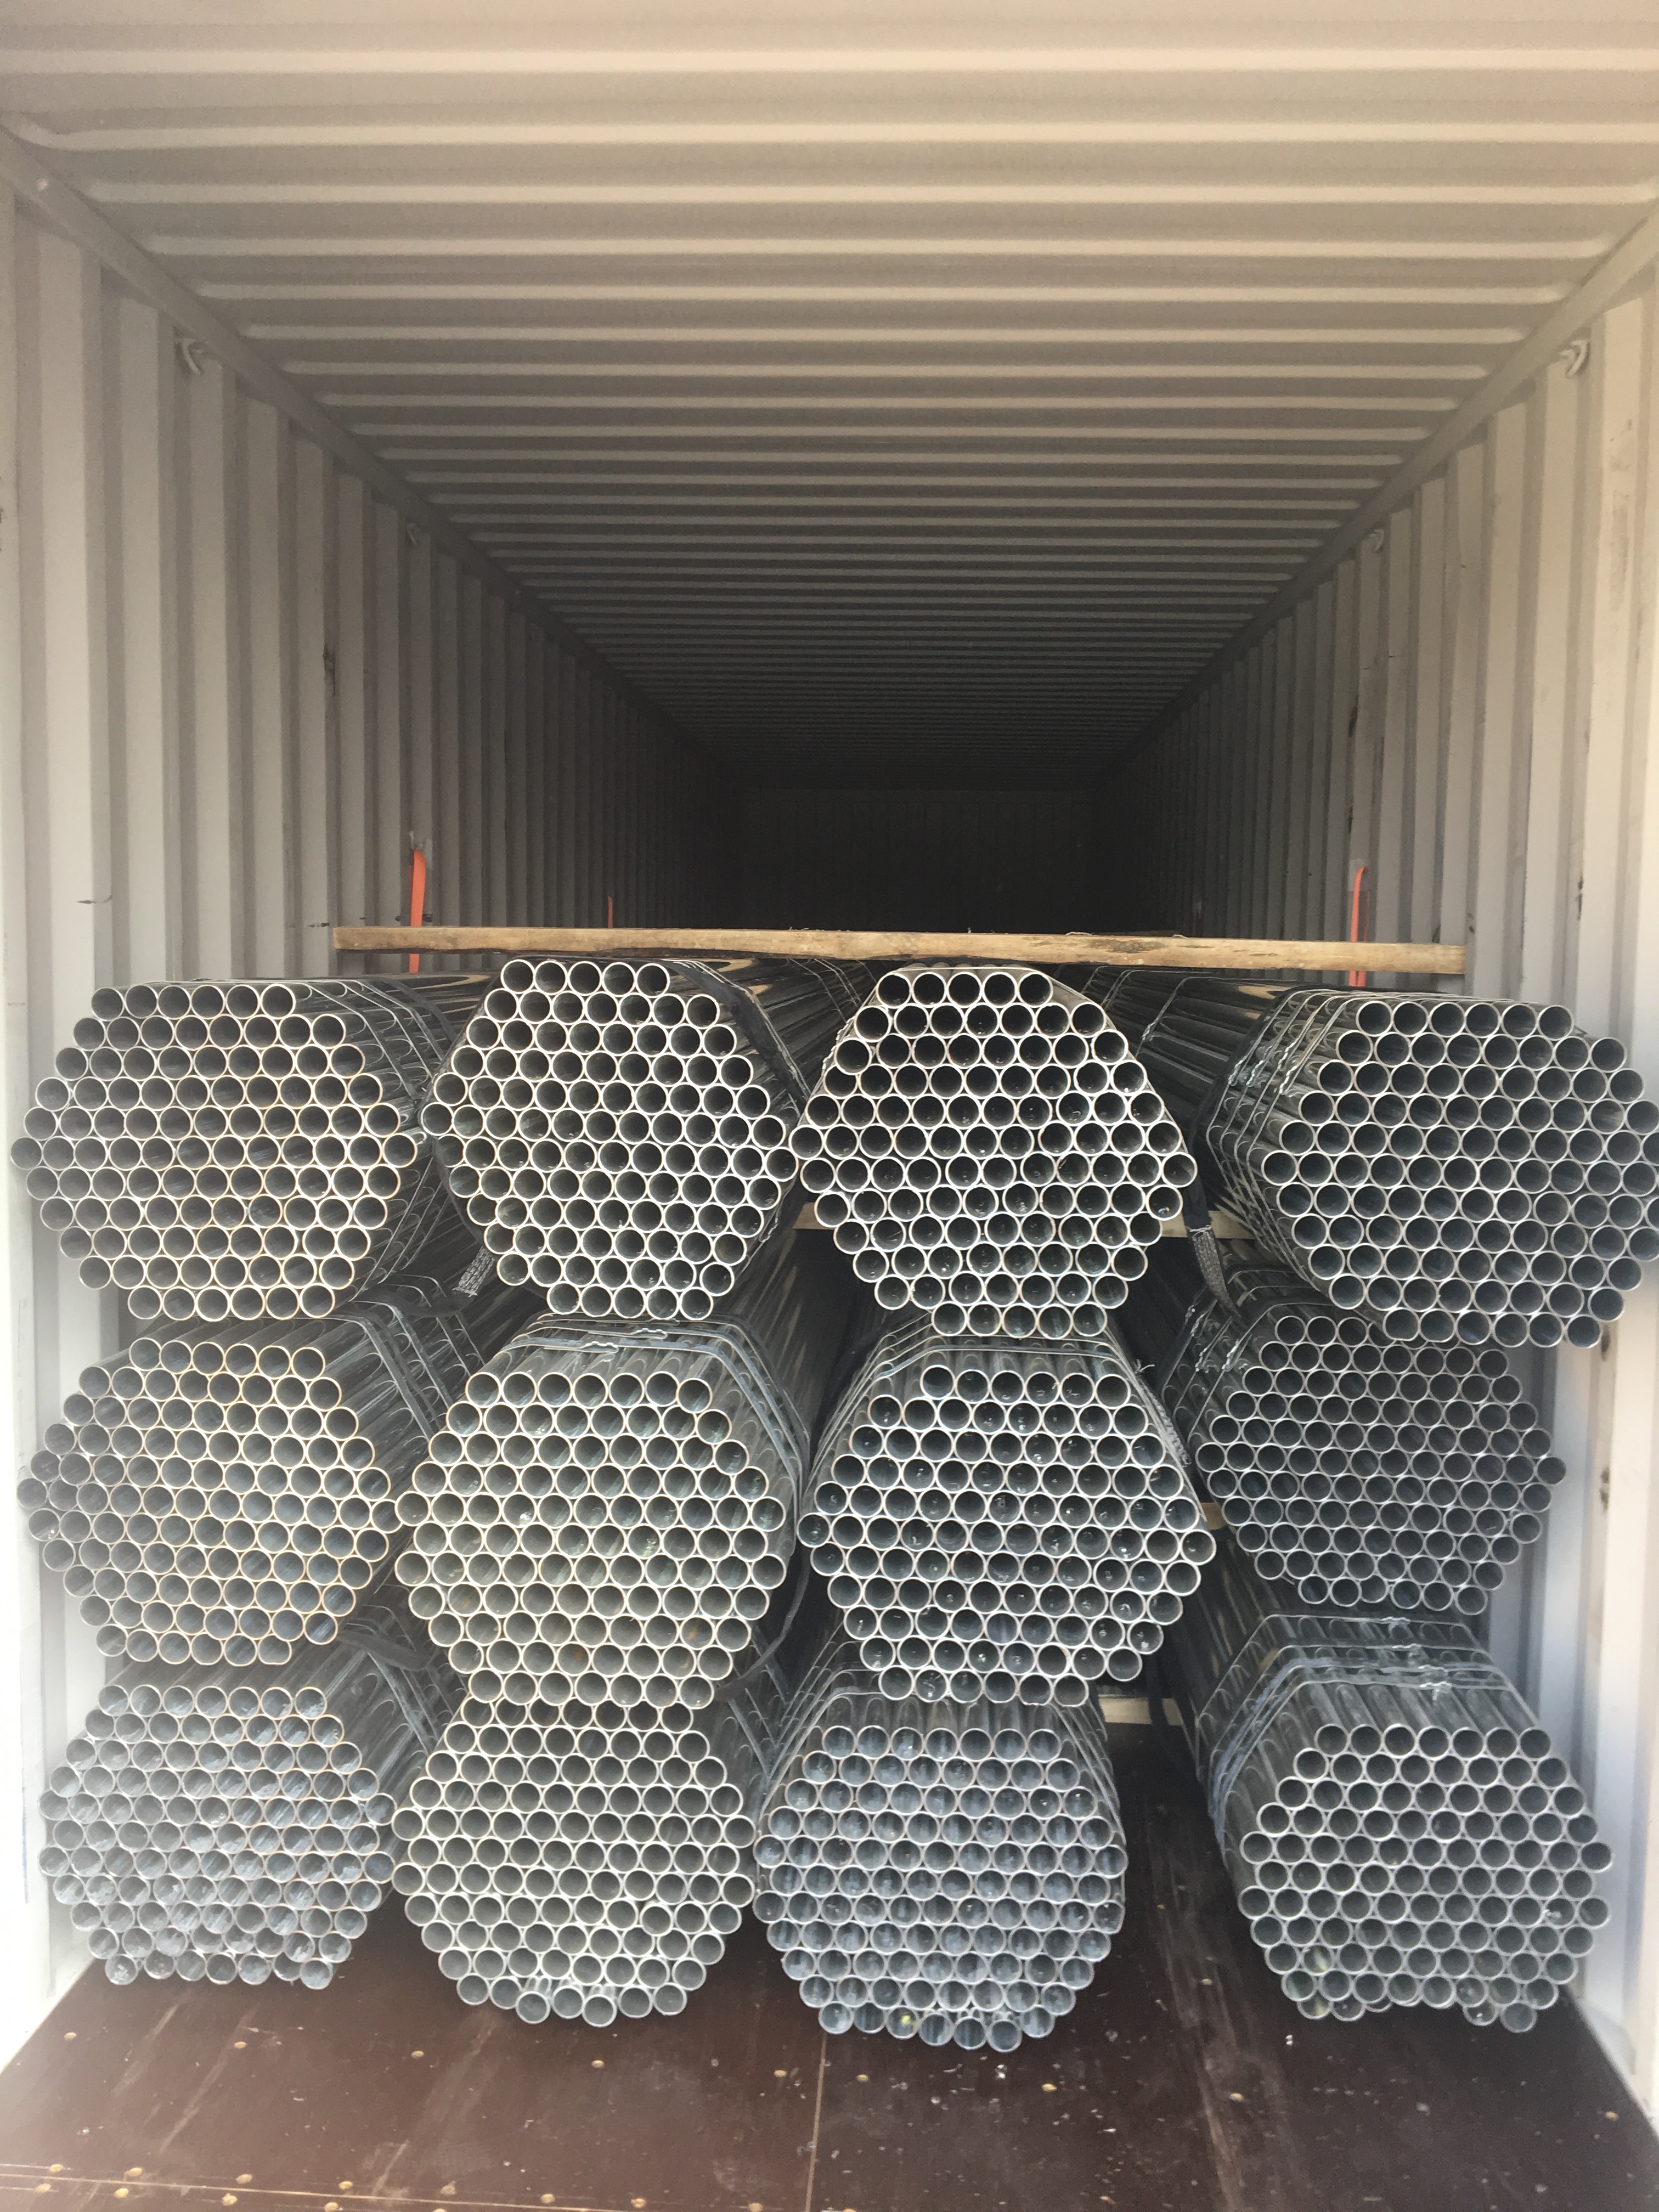 gi round pipe load containers